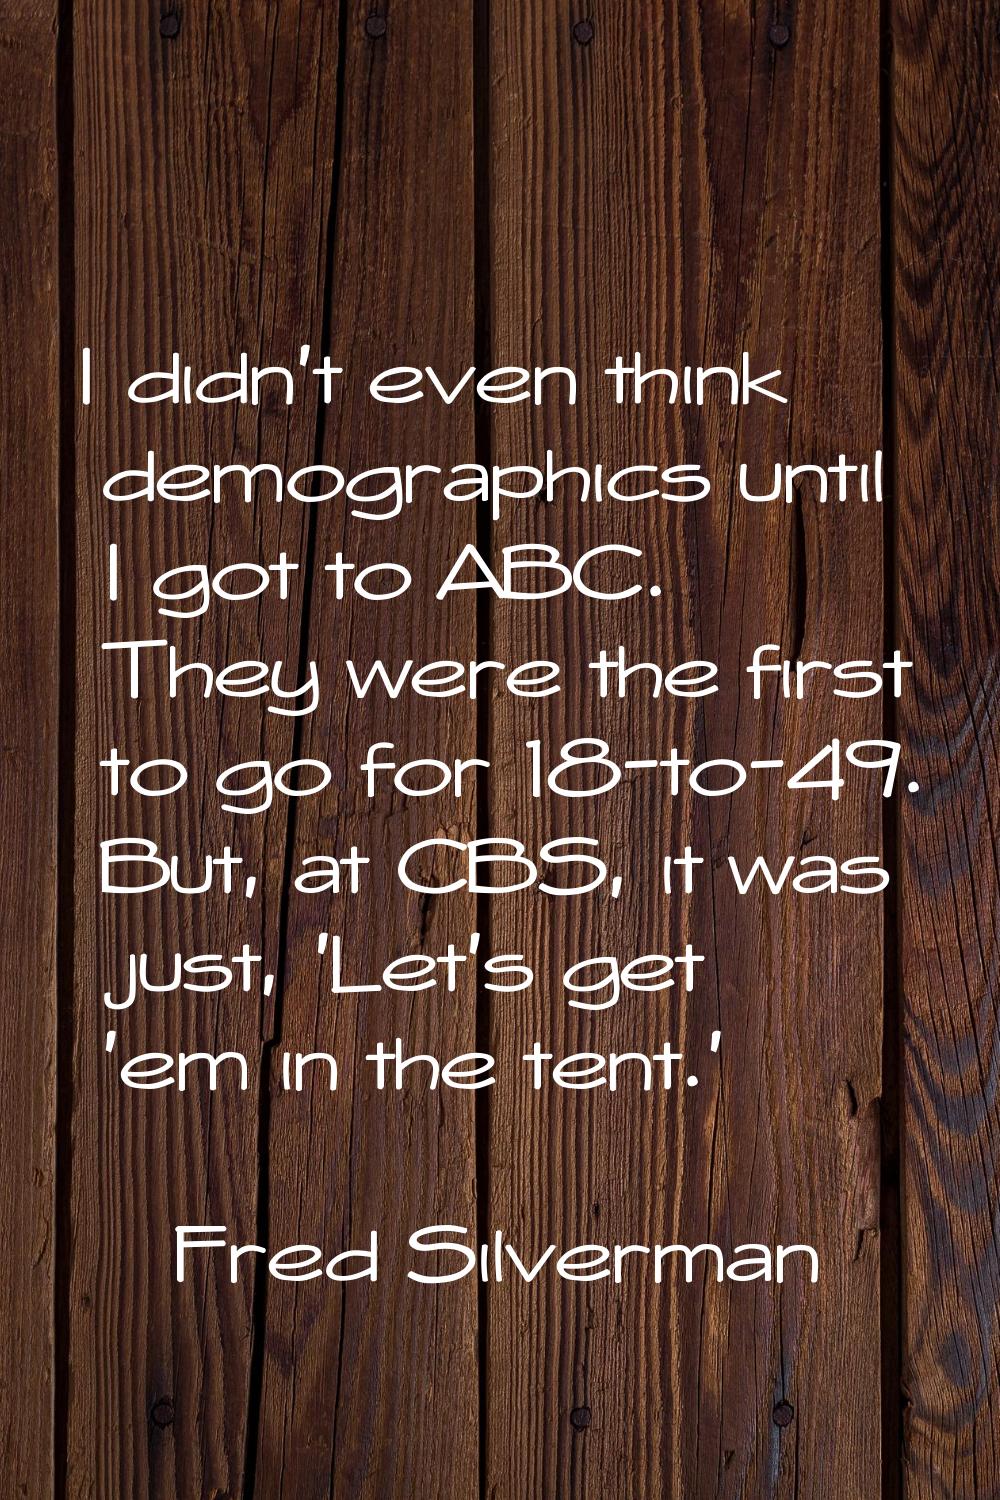 I didn't even think demographics until I got to ABC. They were the first to go for 18-to-49. But, a